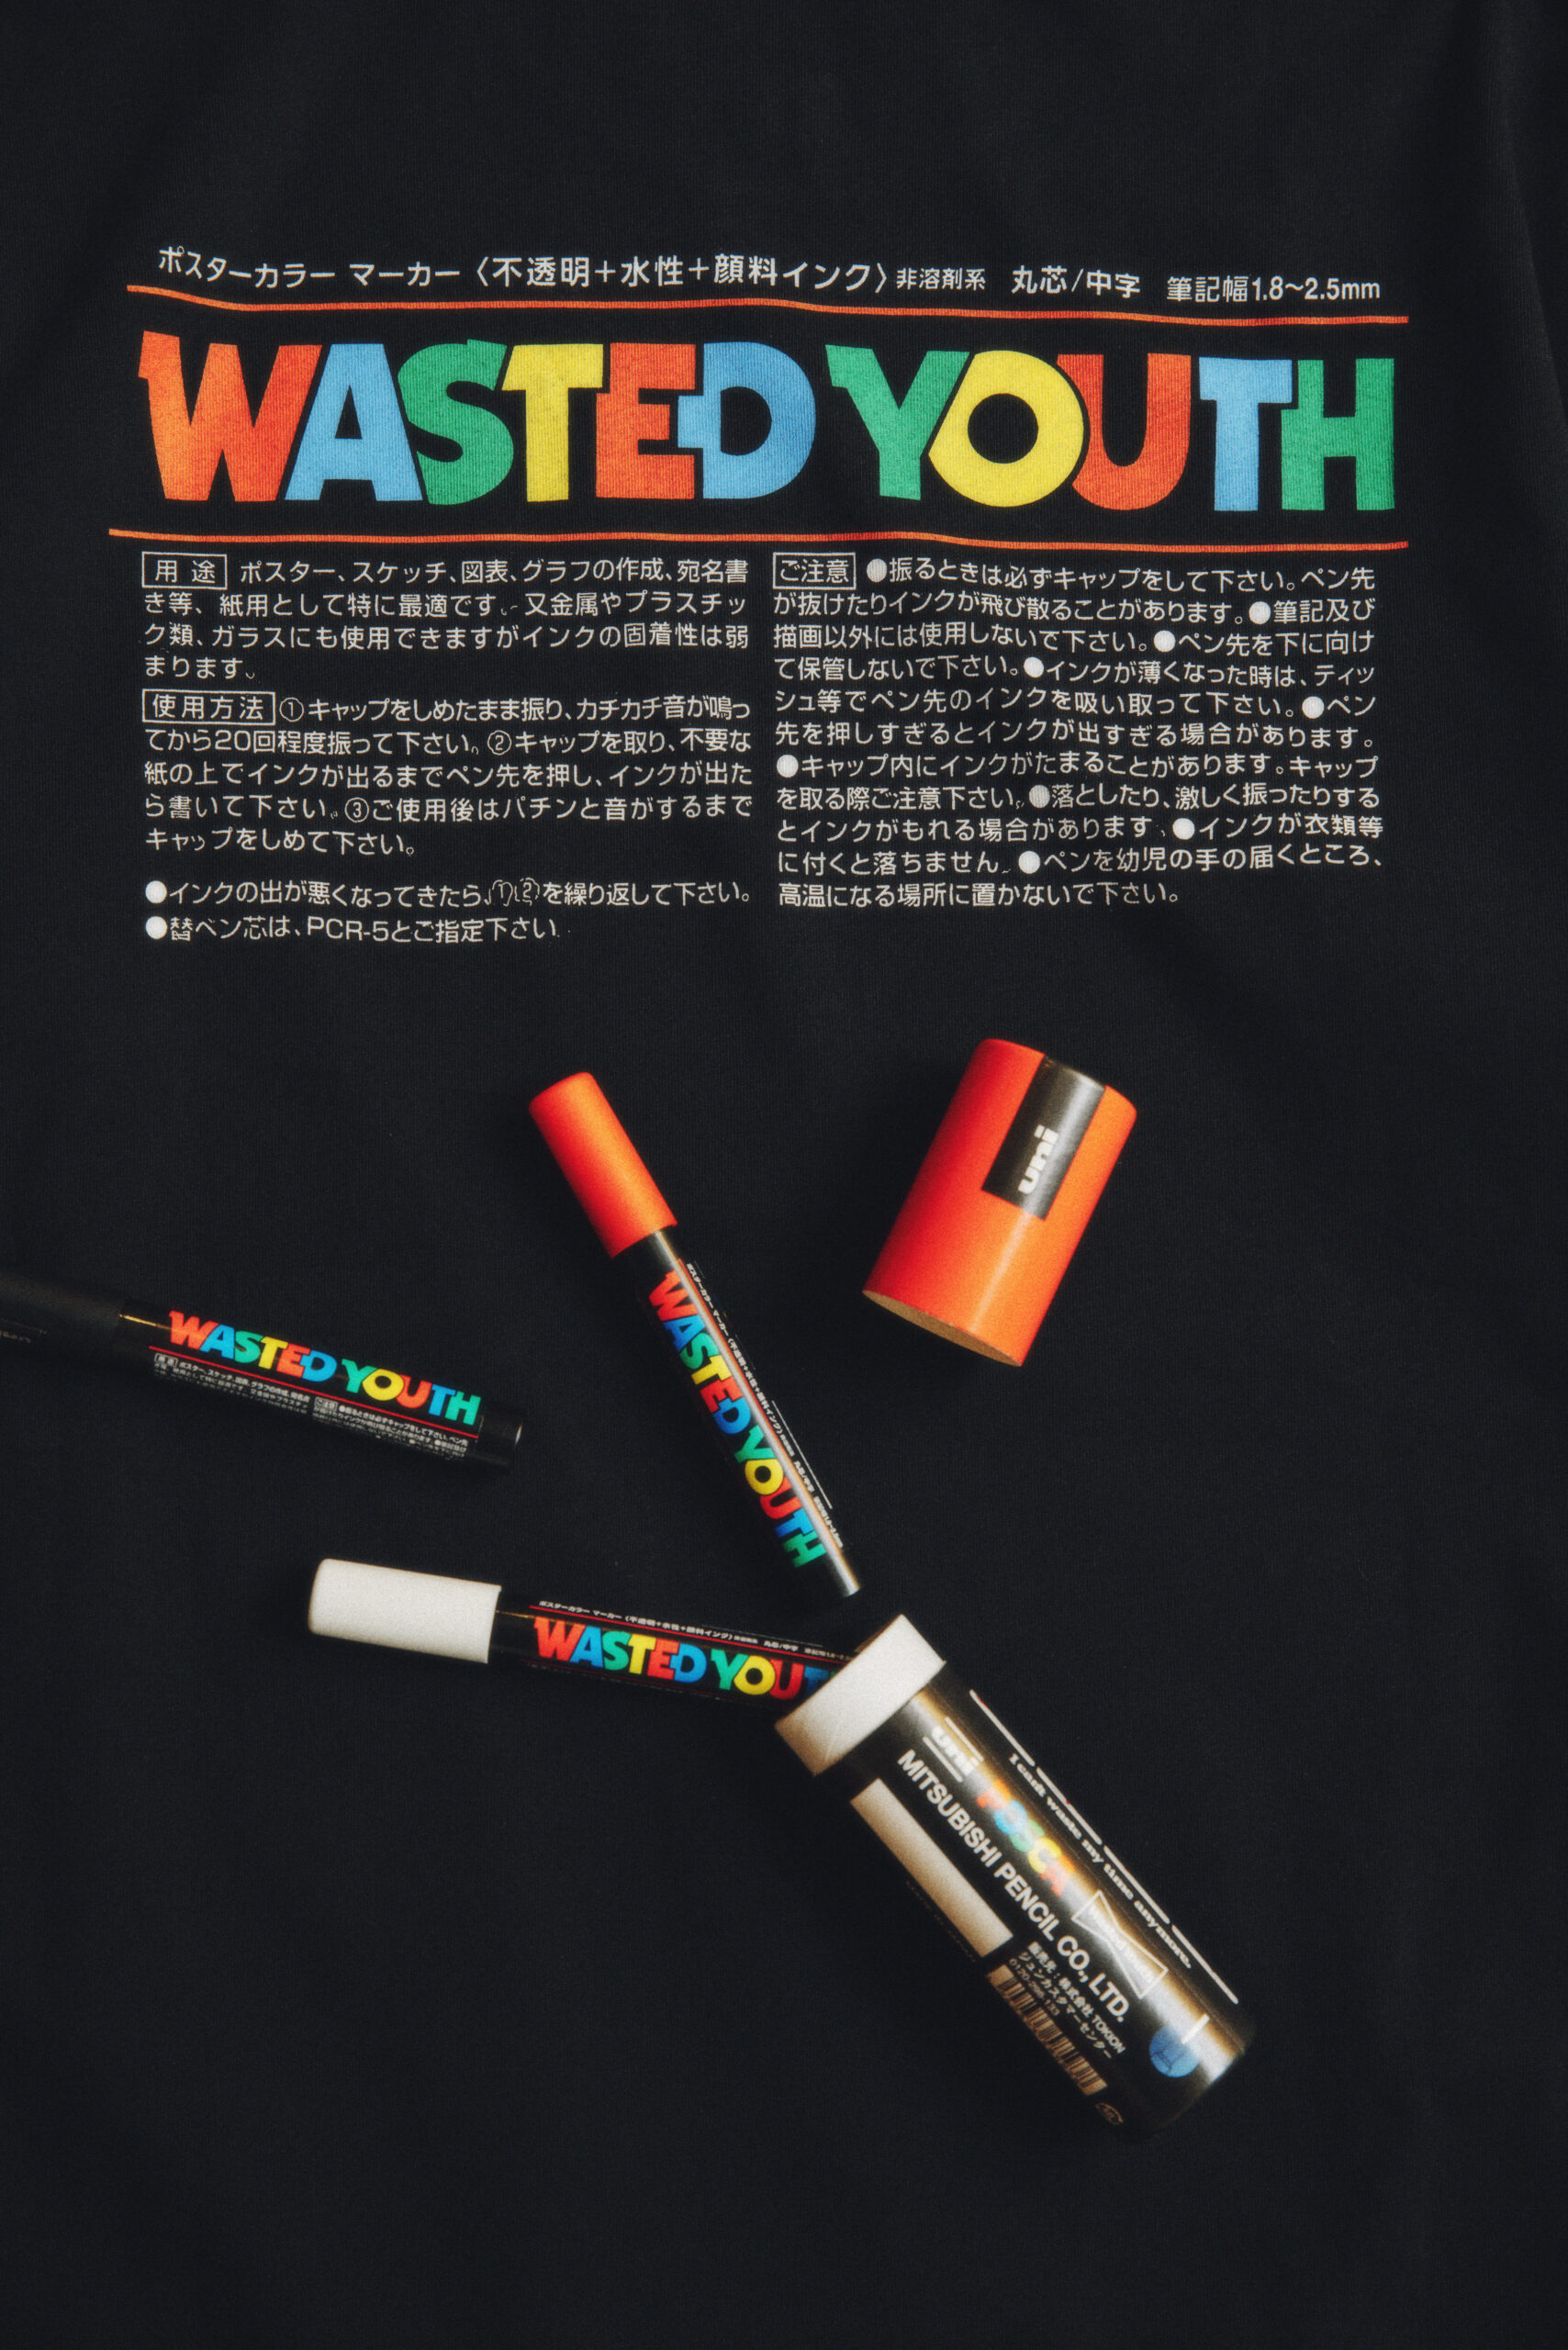 TOKION x Wasted Youth Vol.2 VERDY's sentiments etched in the 